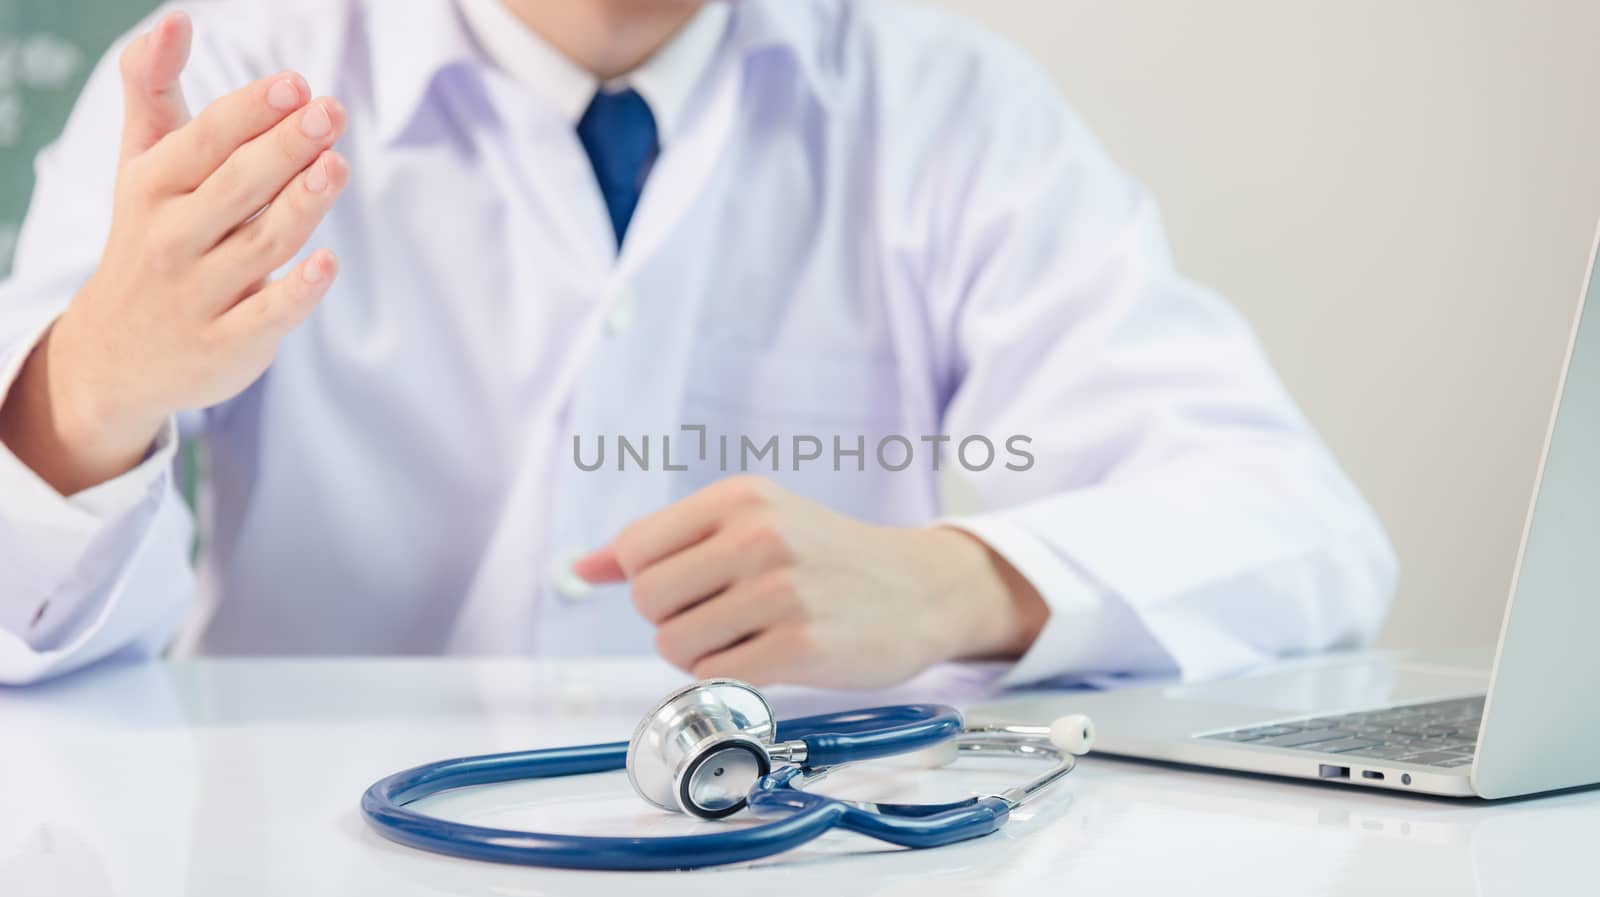 Medicine doctor's working on desk. Closeup of Stethoscope. Physician man video call raise hands explain patient understand on table front computer monitor at hospital office, Healthcare medic concept